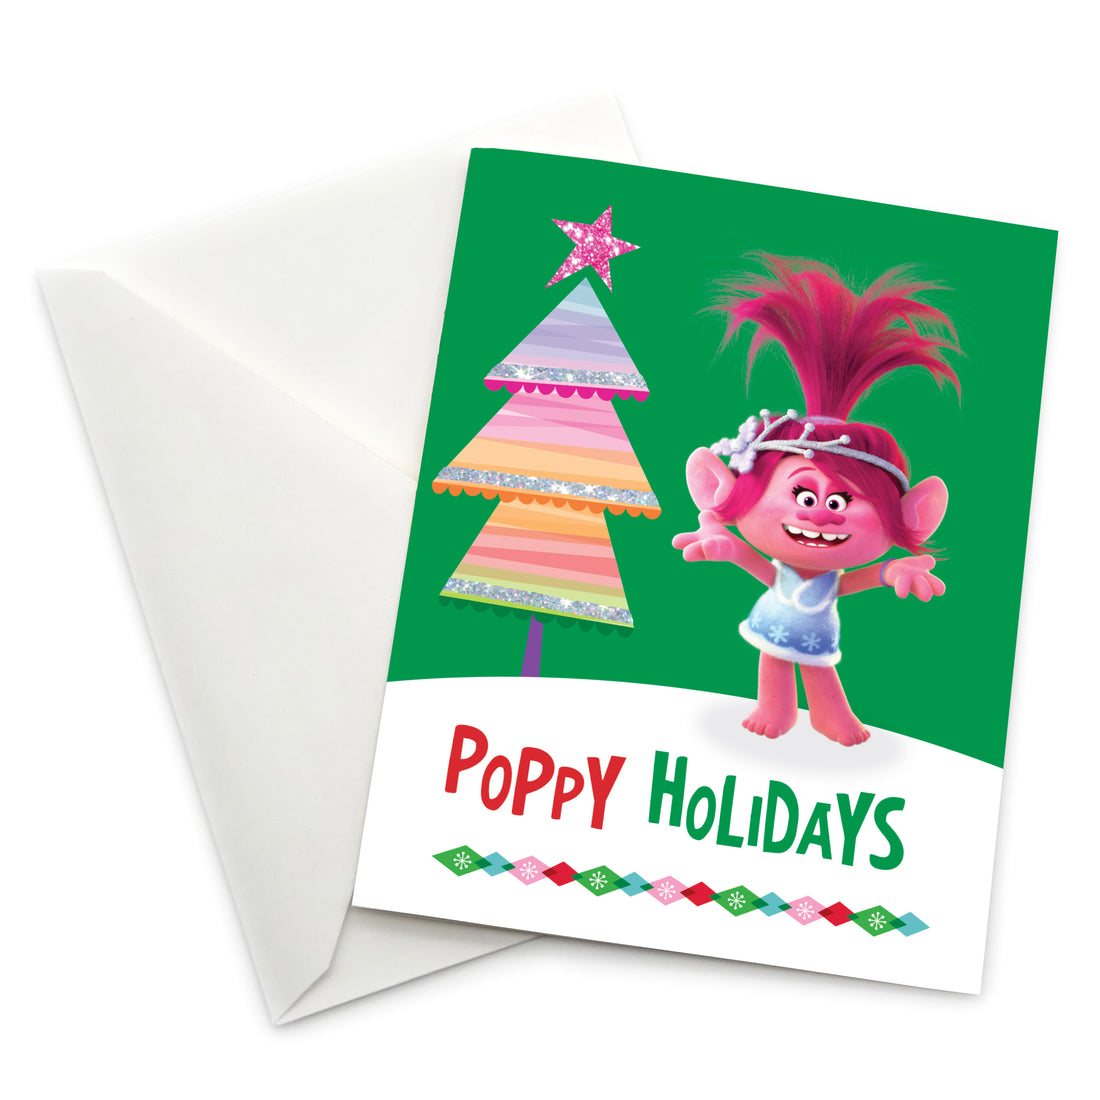 Greeting Card: Trolls, Queen Poppy Poppy Holidays - Pack of 6